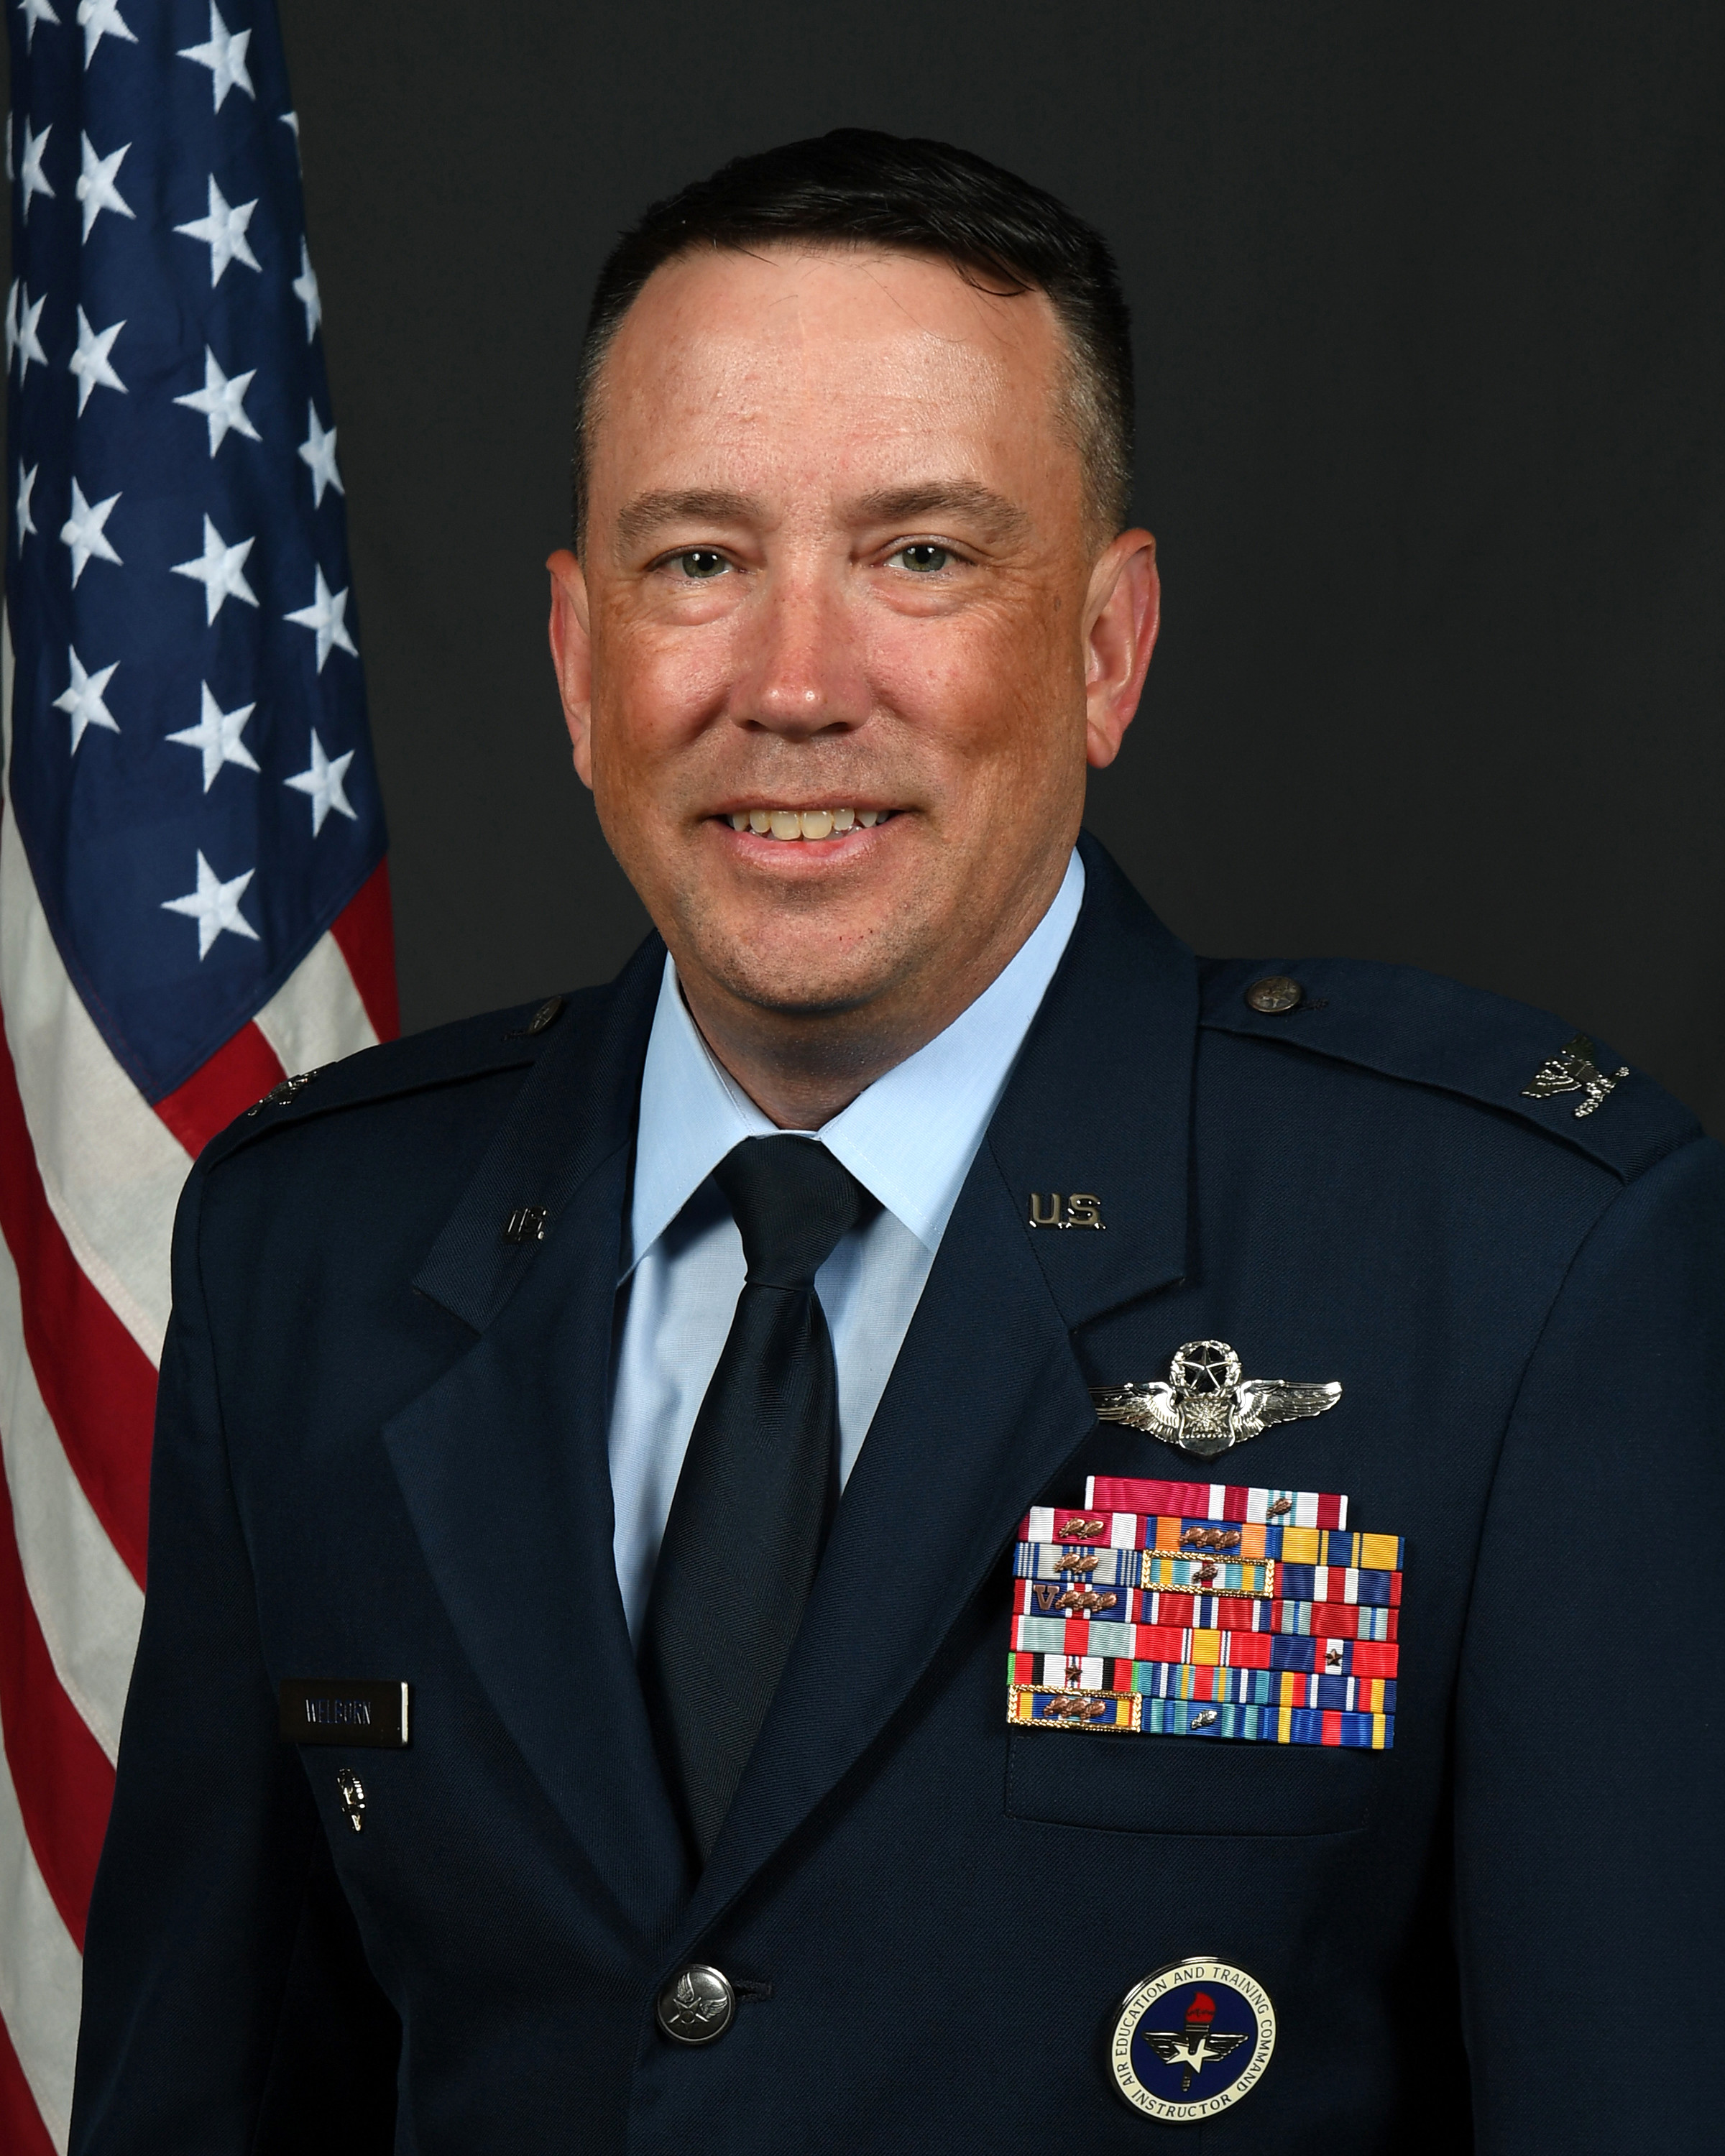 This is the official photo of Col. Jeffrey H. Welborn, Vice Commander of the Air Force Safety Center.